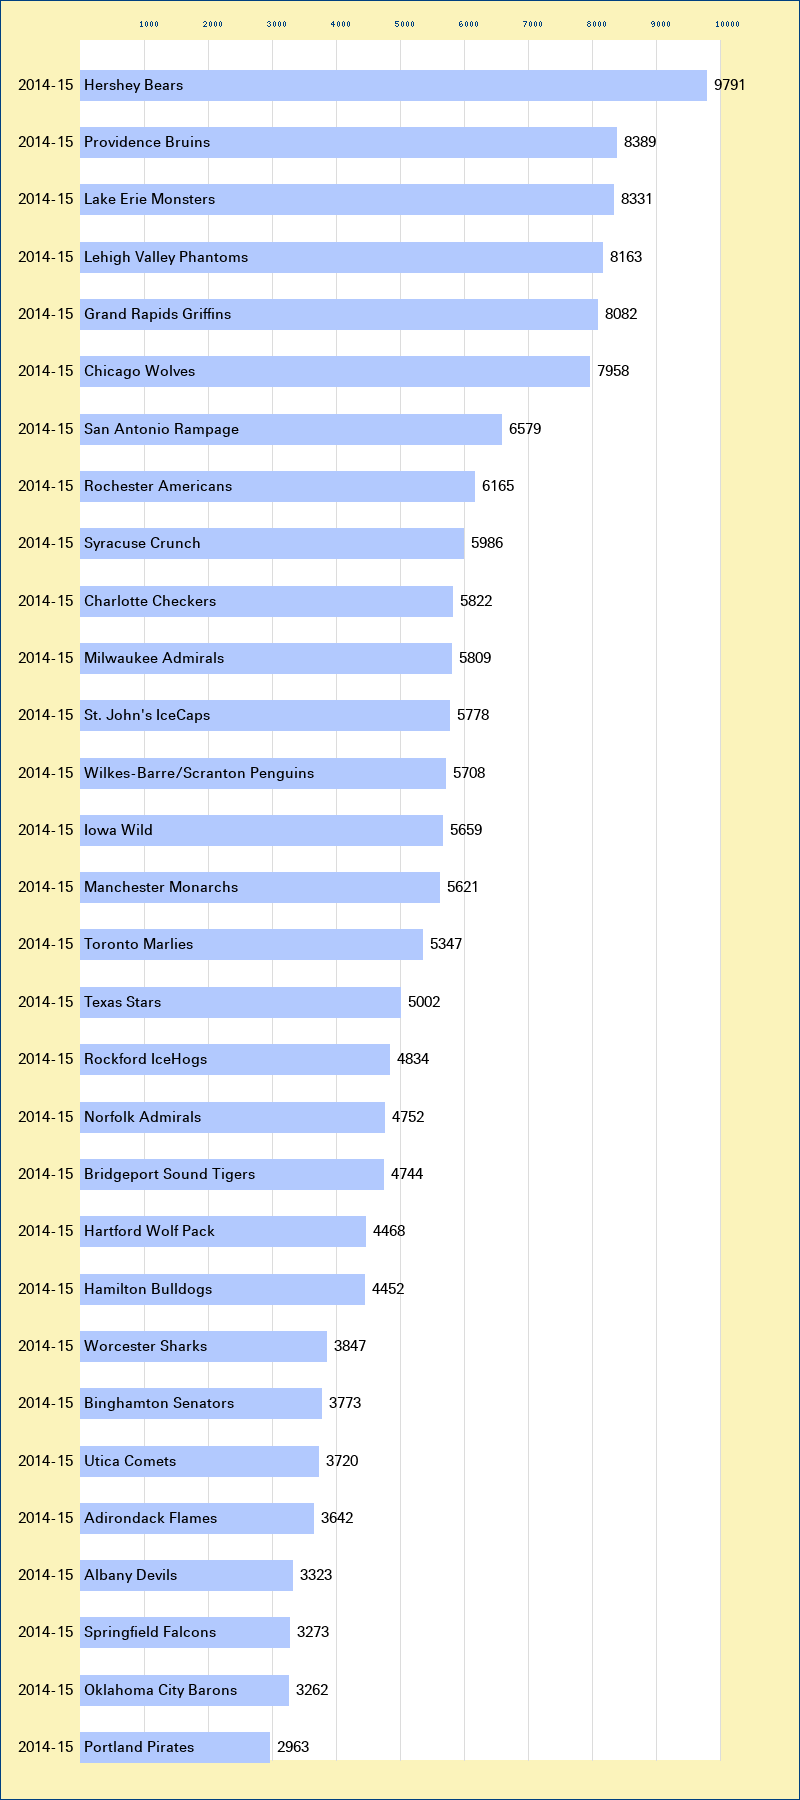 Attendance graph of the AHL for the 2014-15 season